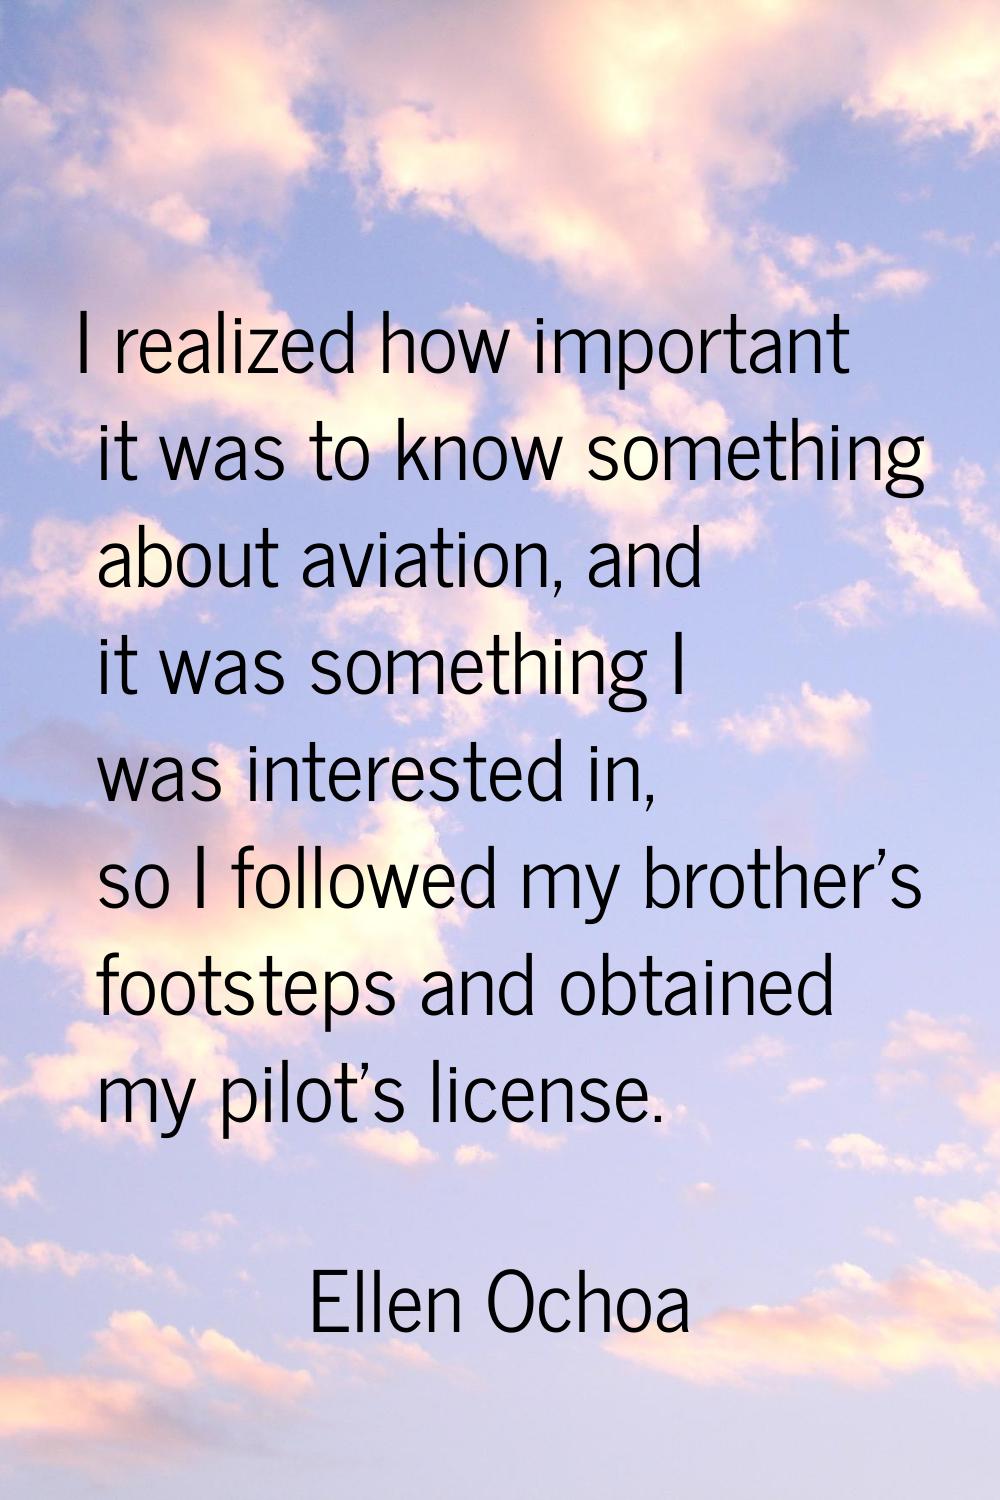 I realized how important it was to know something about aviation, and it was something I was intere